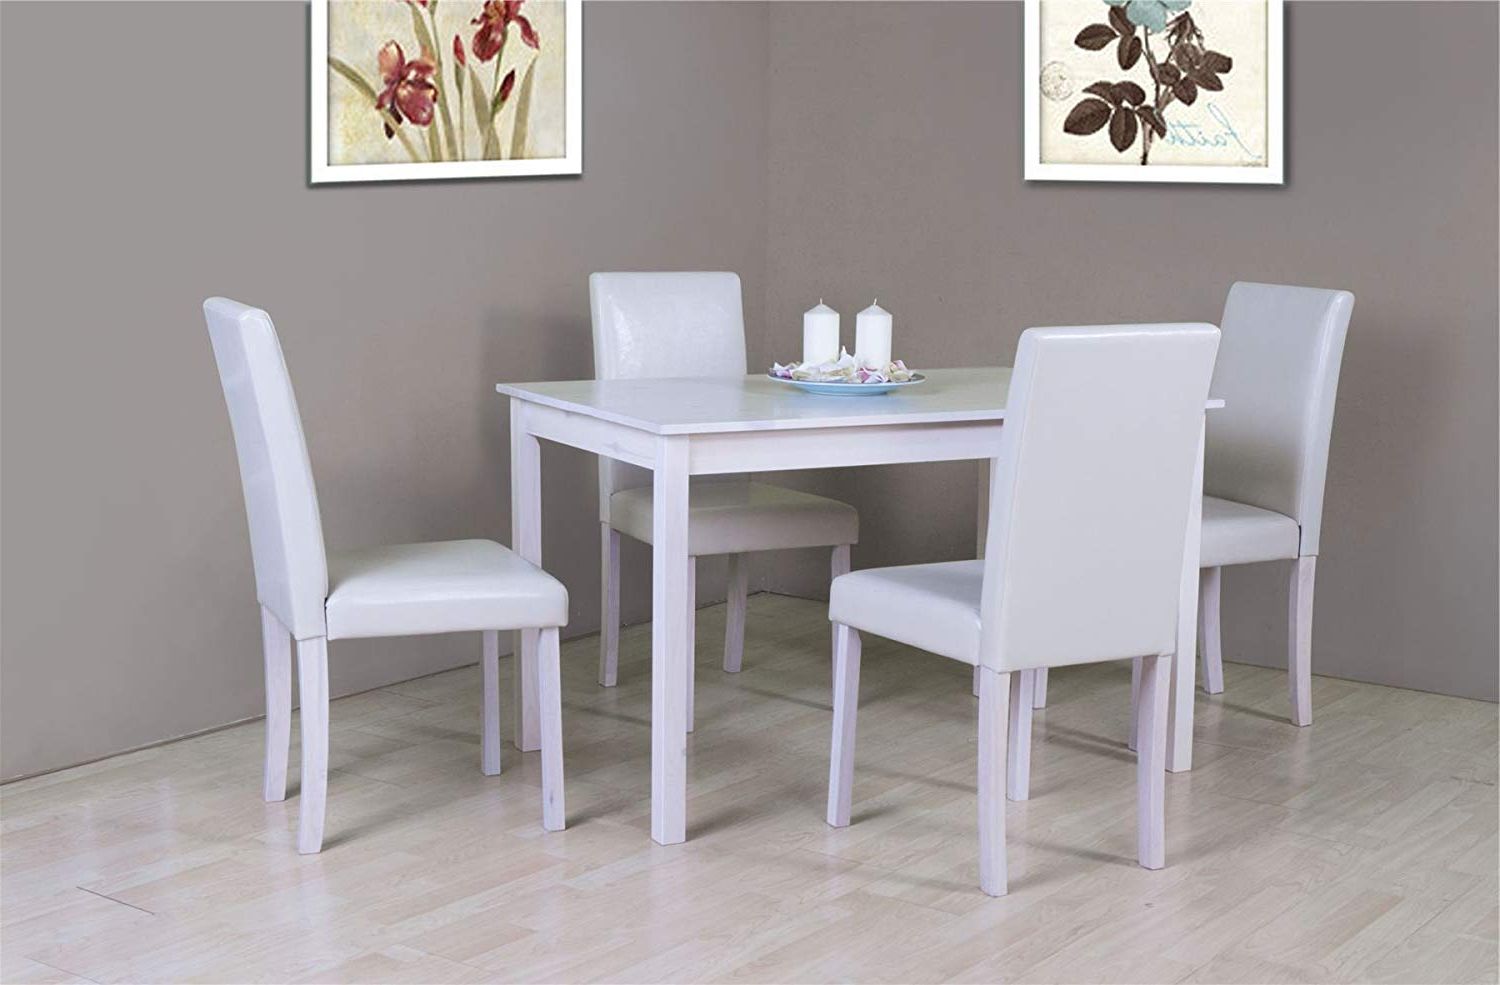 Gray Wash Lorraine Extending Dining Tables Intended For Current Abakus Direct Polo White/cream Oak Effect Wooden Dining Table And 4 High  Back Chair Set (Photo 19 of 25)